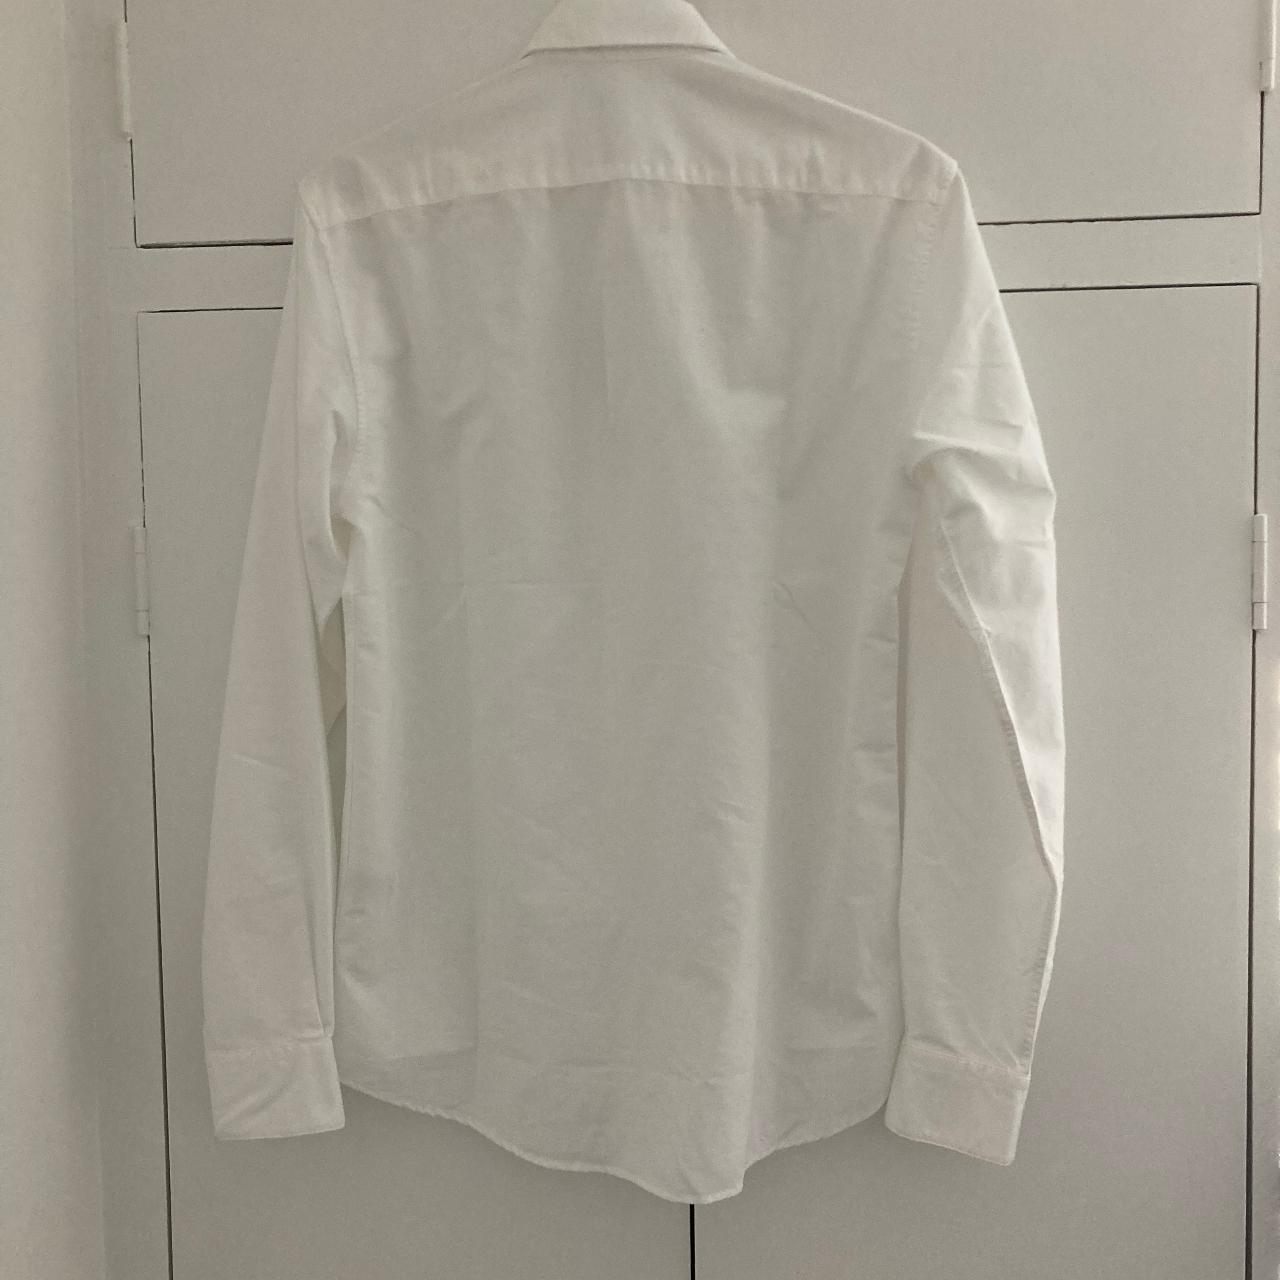 Product Image 2 - Sunspel white oxford shirt

This is